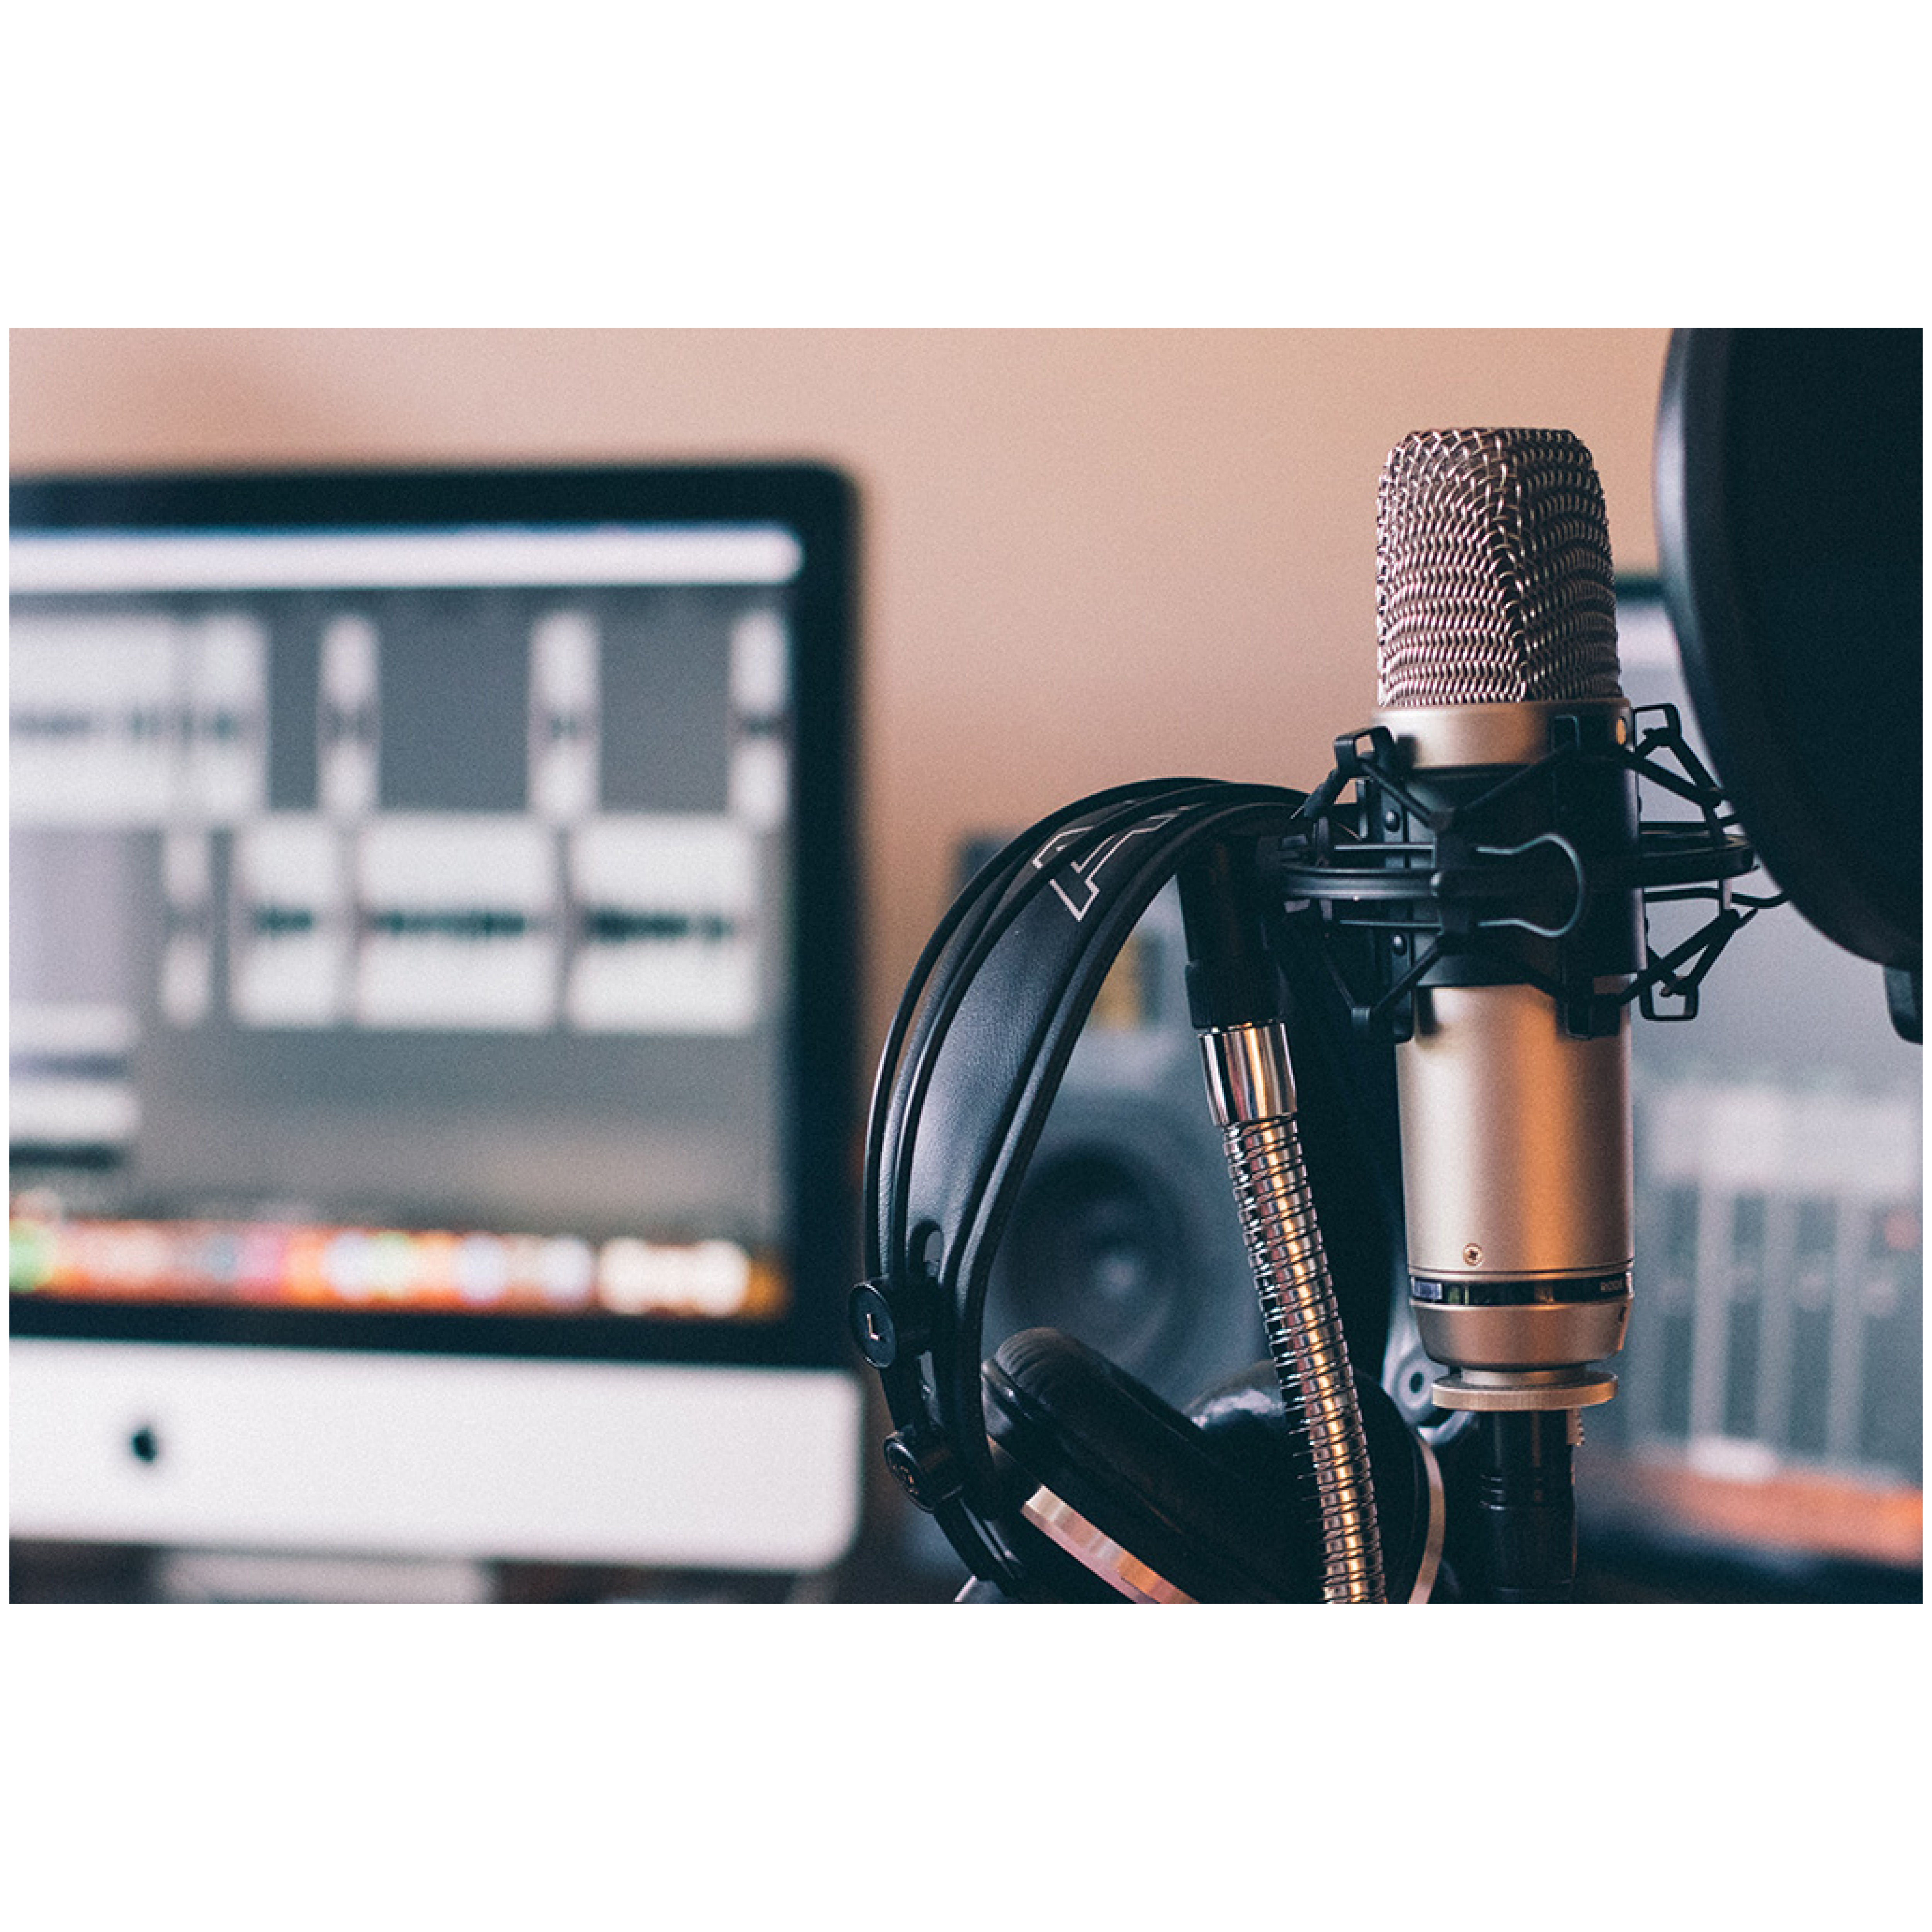 Image of a microphone against a podcast setup